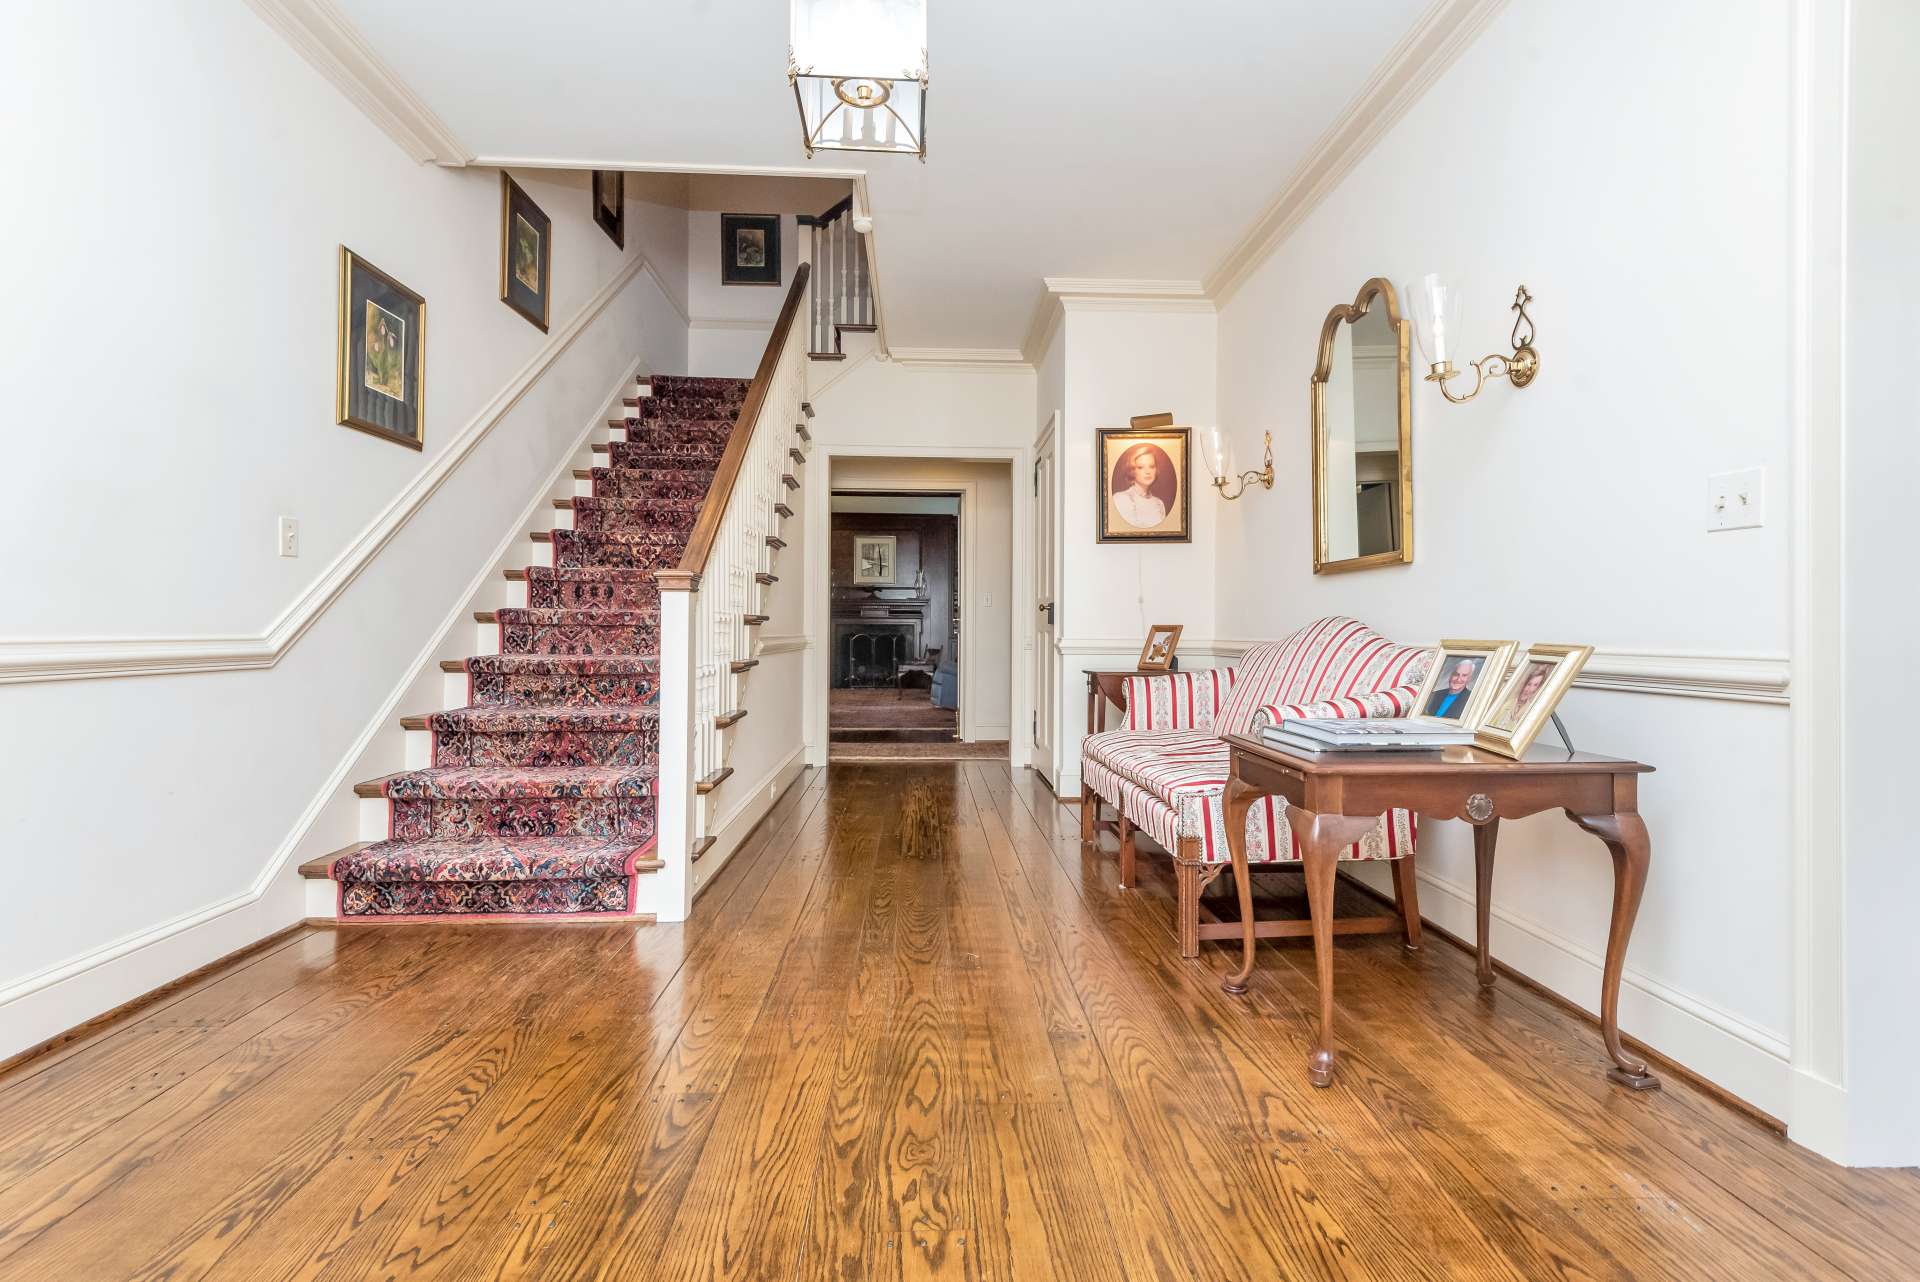 A grand foyer is flanked by the parlor on the left, and the formal dining room on the right. Notice the beautiful wood floors with the notched accents.